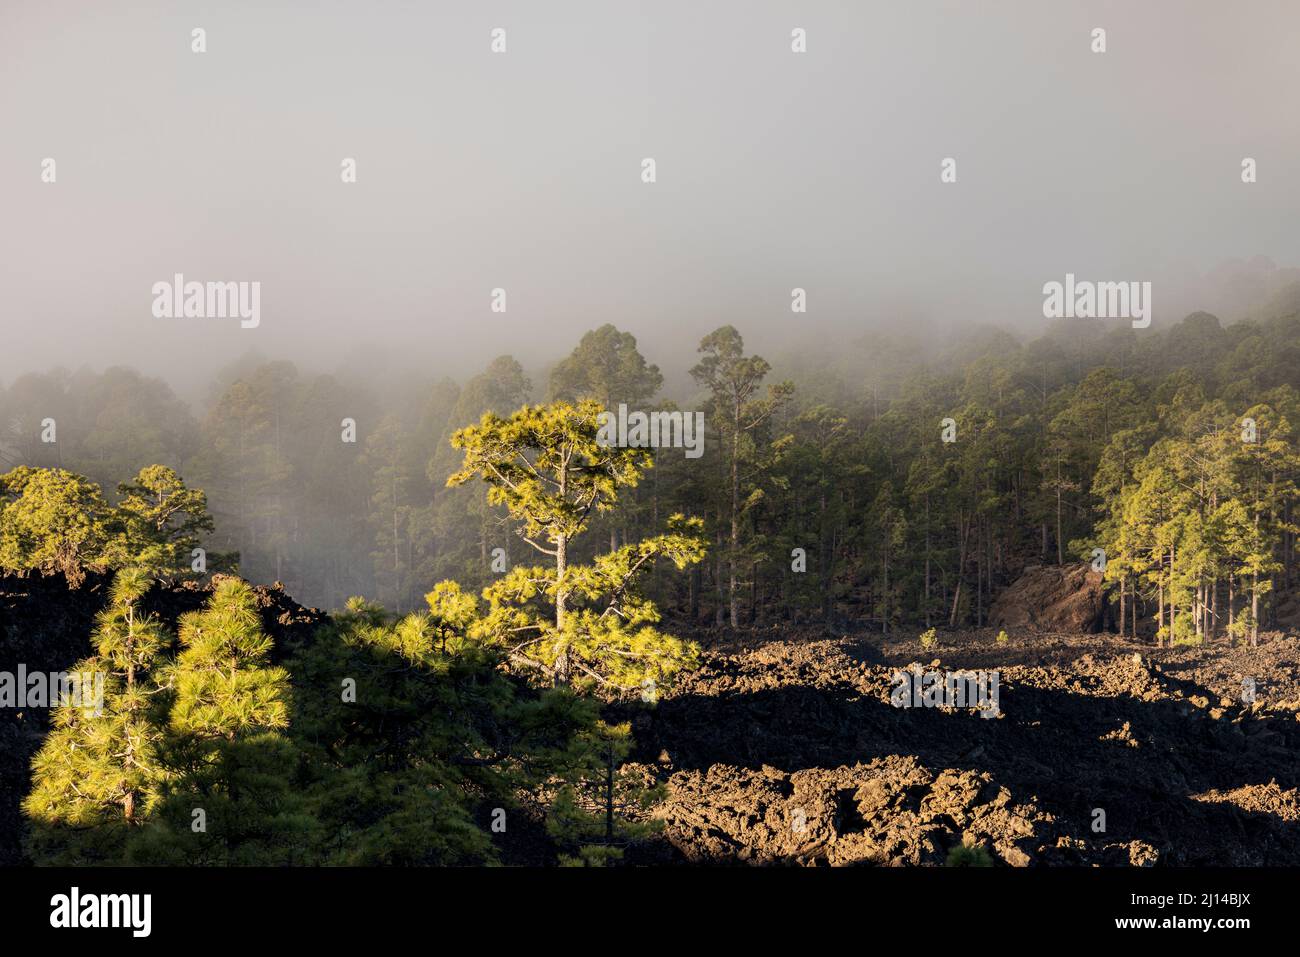 Canarian pine trees, pinus canariensis growing in the solidified lava fields on a cloudy, misty morning in the volcanic landscape of the Las Canadas d Stock Photo